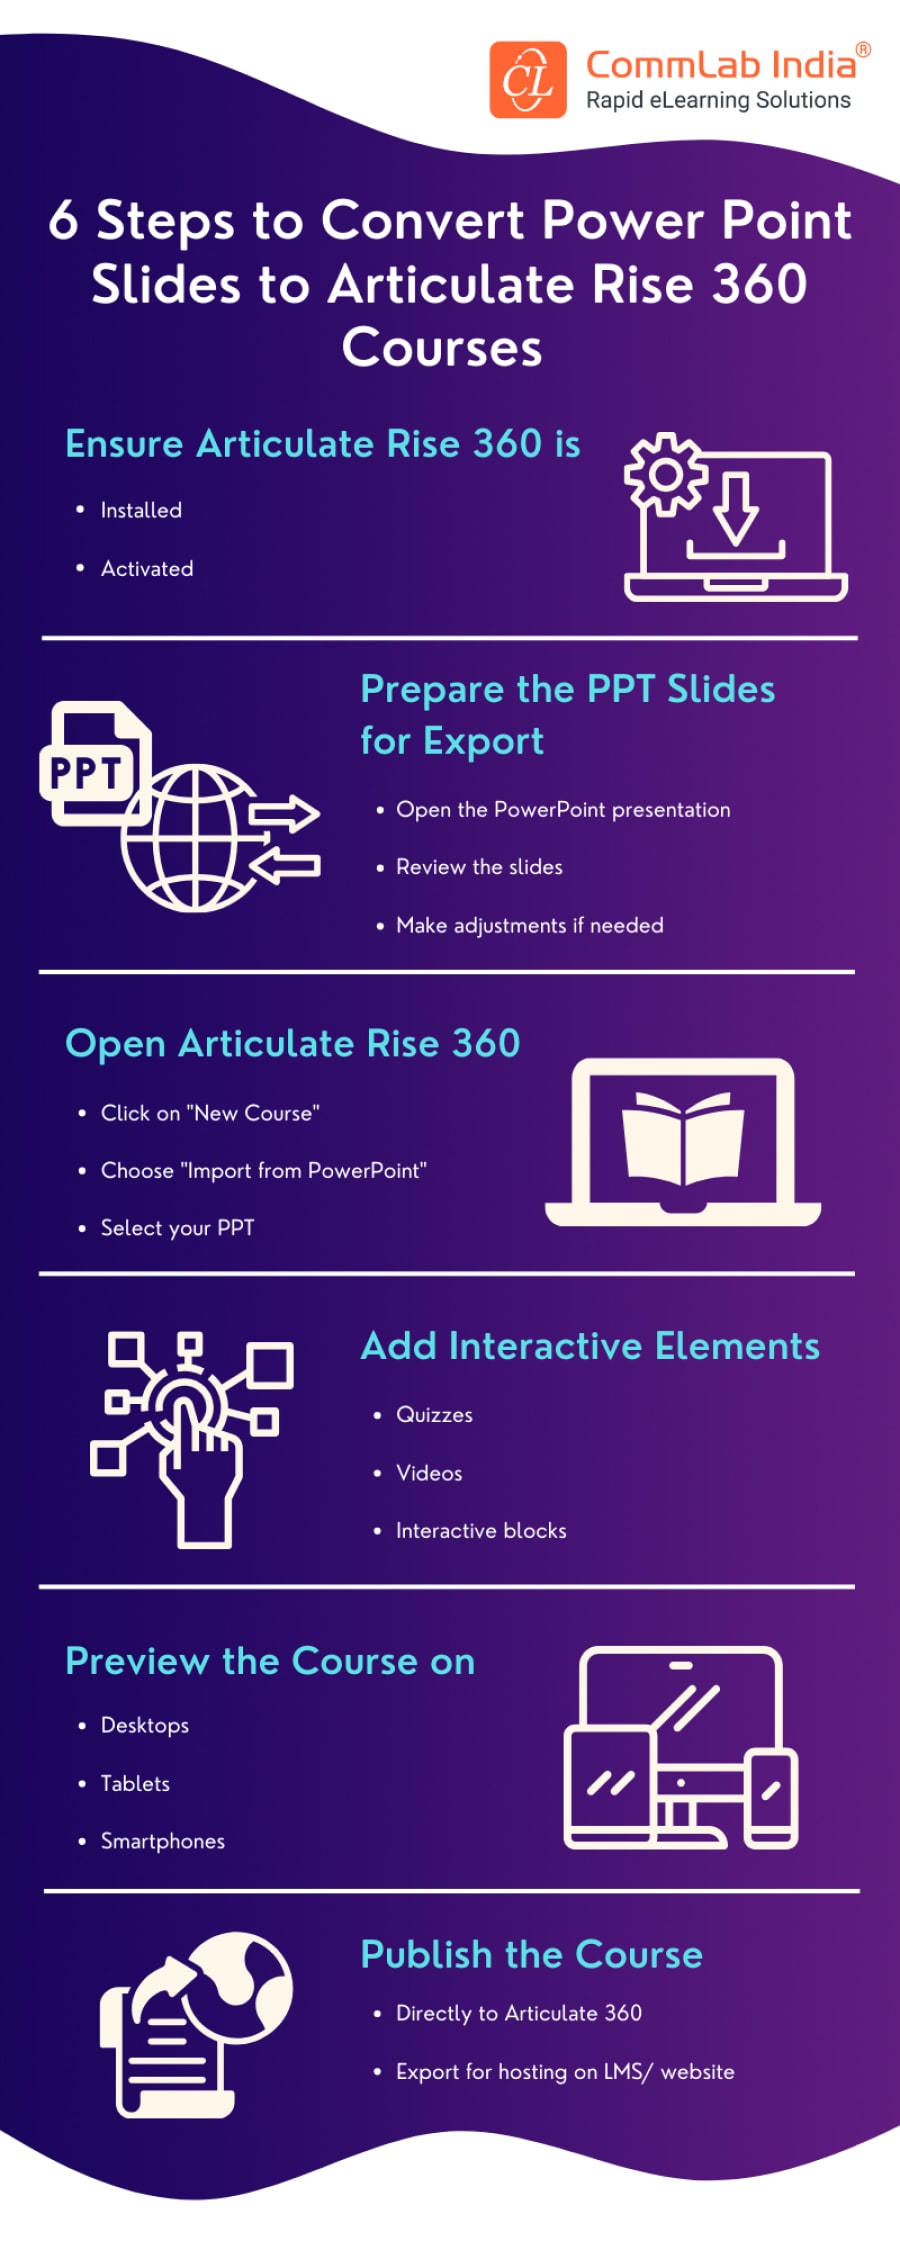 6 Steps to Convert PowerPoint Slides to Articulate Rise 360 Courses